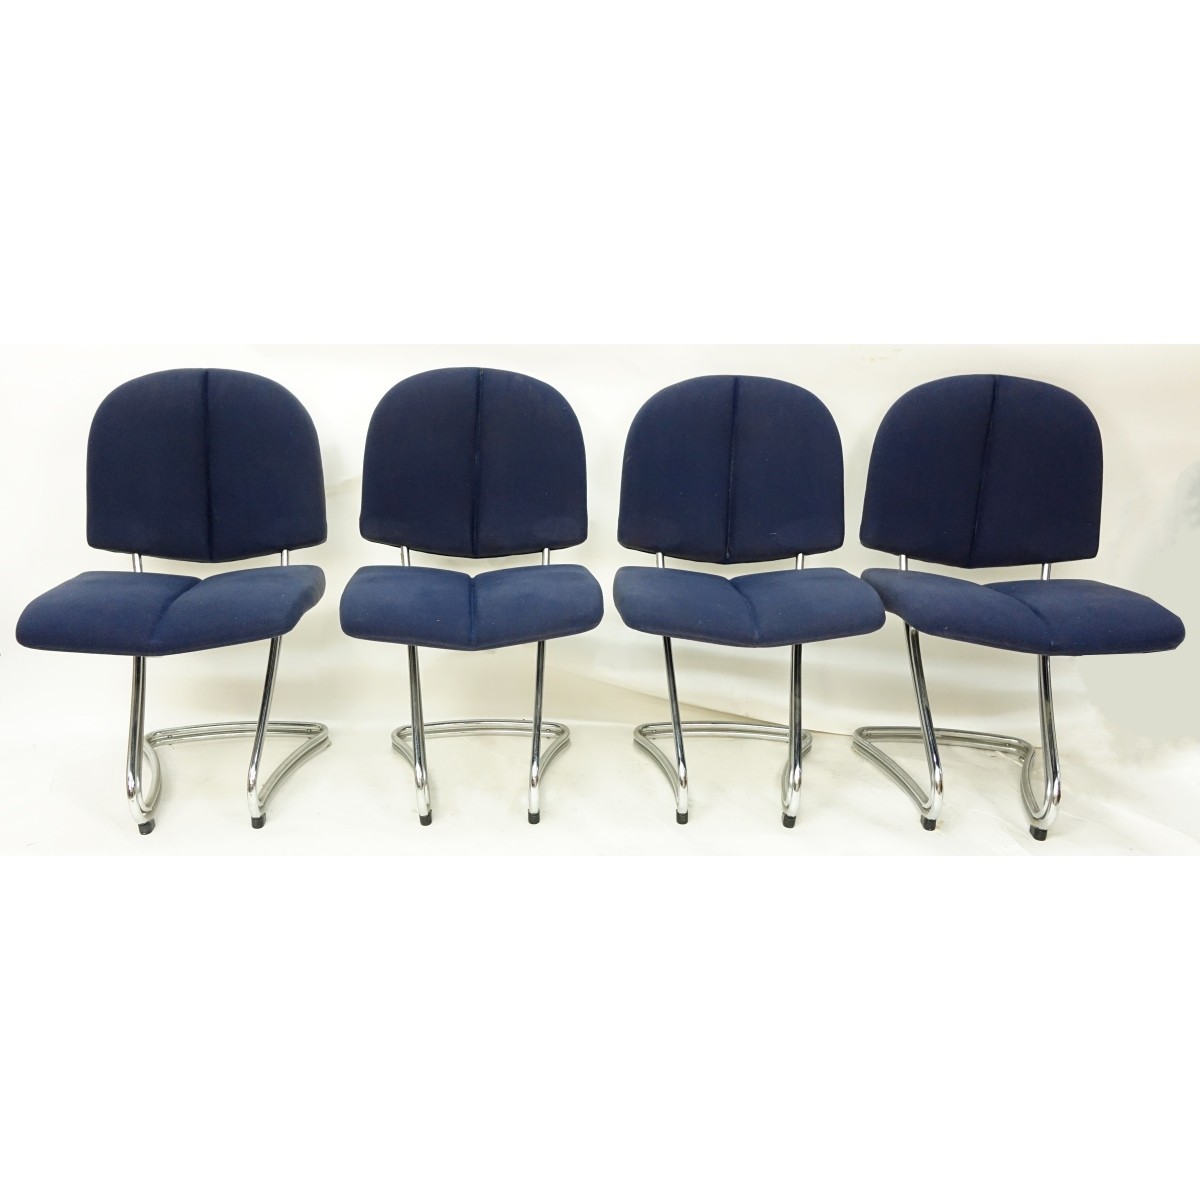 Four (4) Modern Chrome and Upholstered Chairs